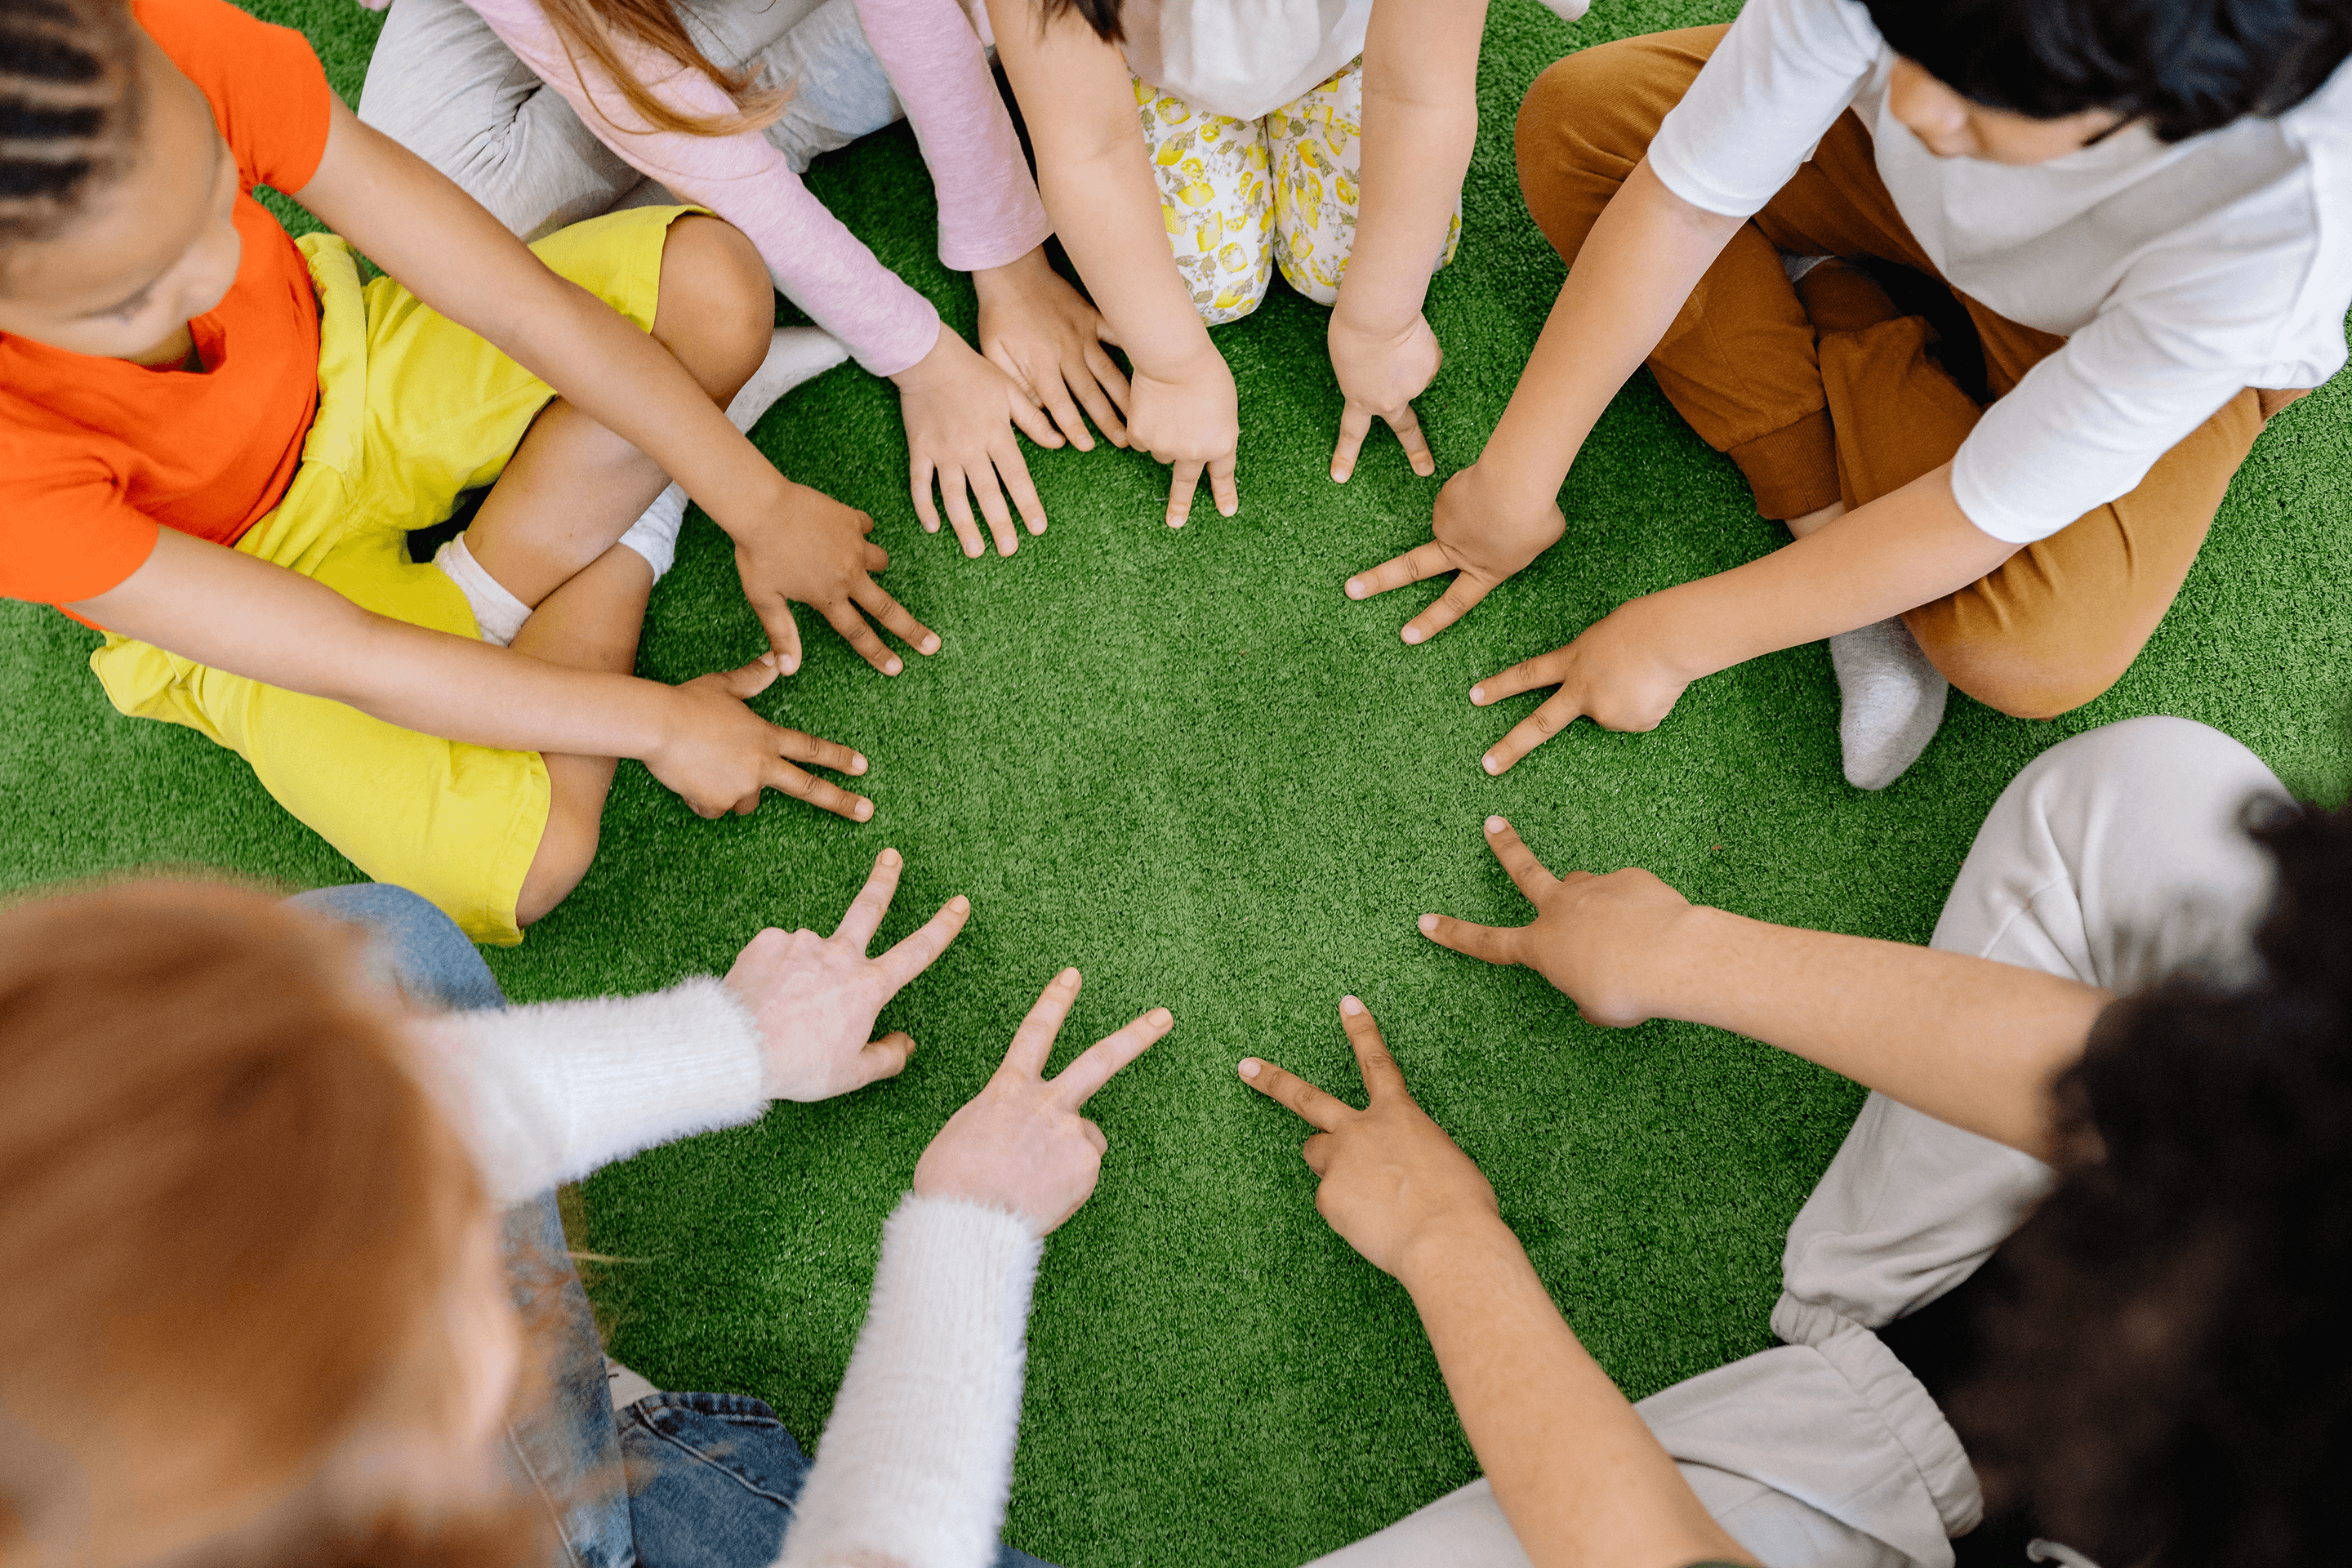 Group of children with developmental needs sitting in a circle